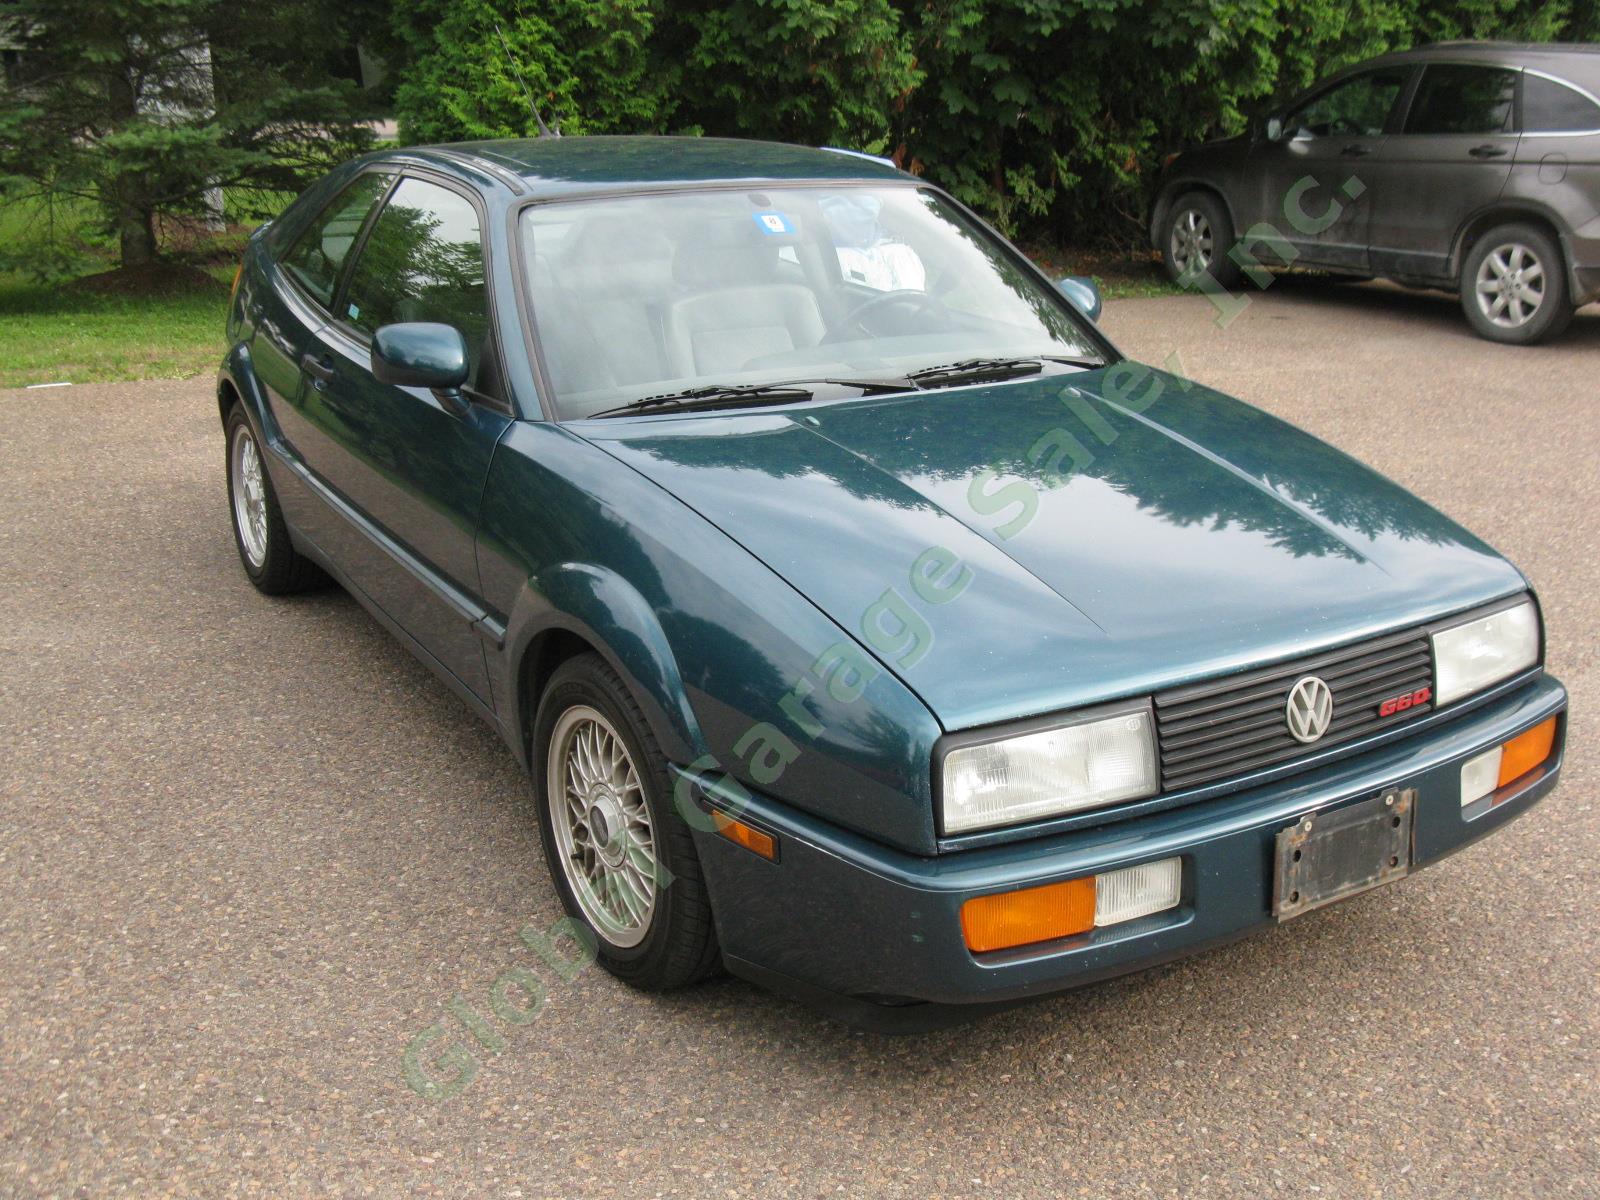 1992 VW Volkswagen Corrado G60 Supercharged 158hp 1.8L 5-Spd One Owner LOW PRICE